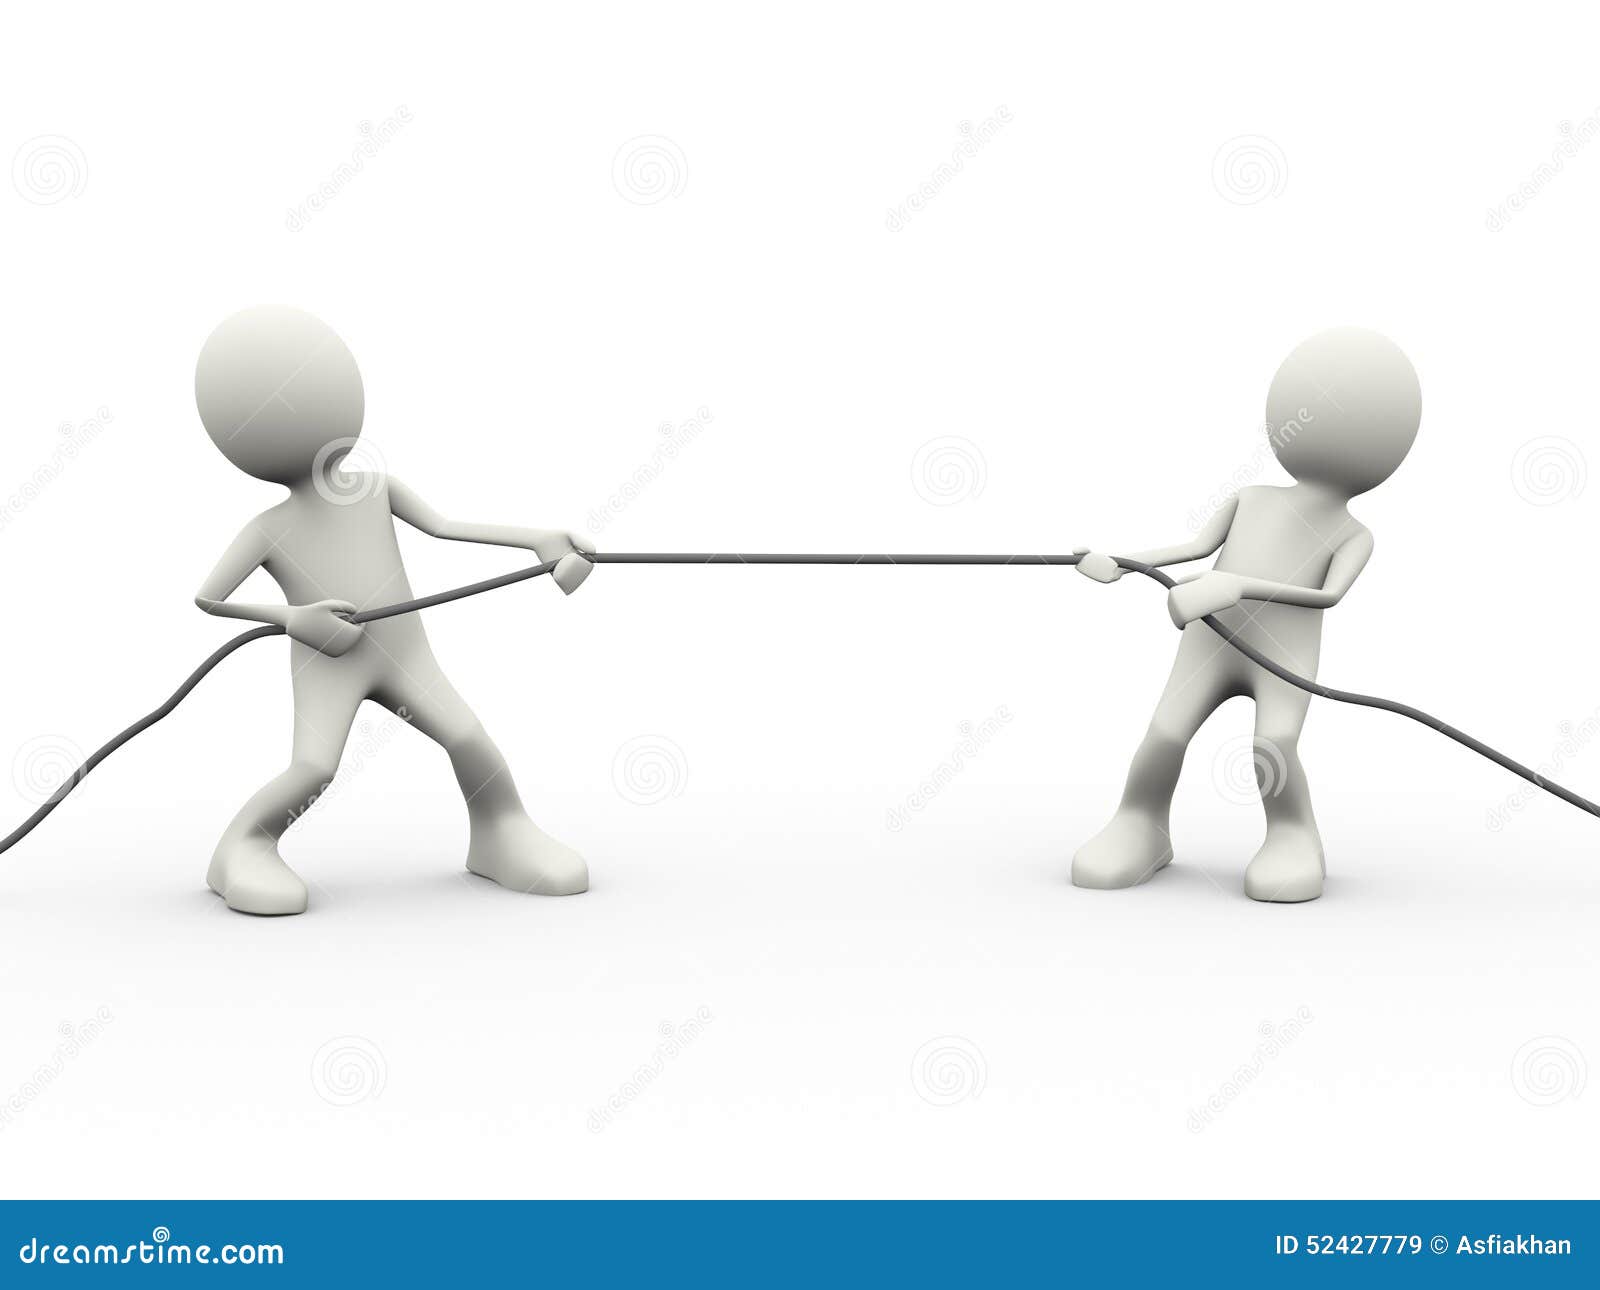 clipart tug of war rope - photo #11